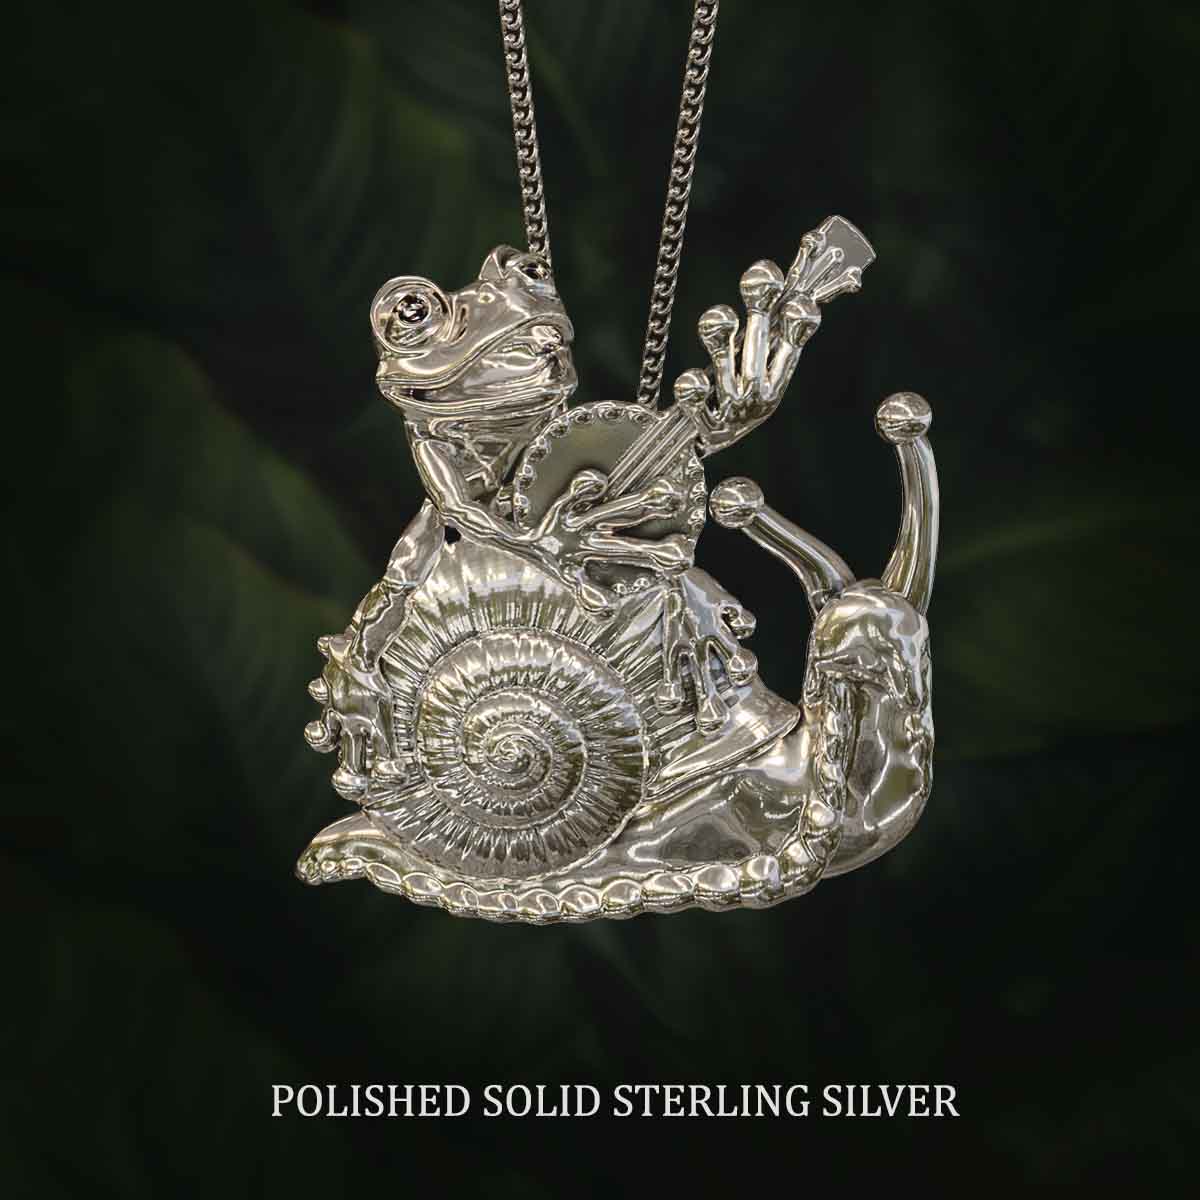     Polished-Solid-Sterling-Silver-Serenading-Frog-and-Snail-Pendant-Jewelry-For-Necklace